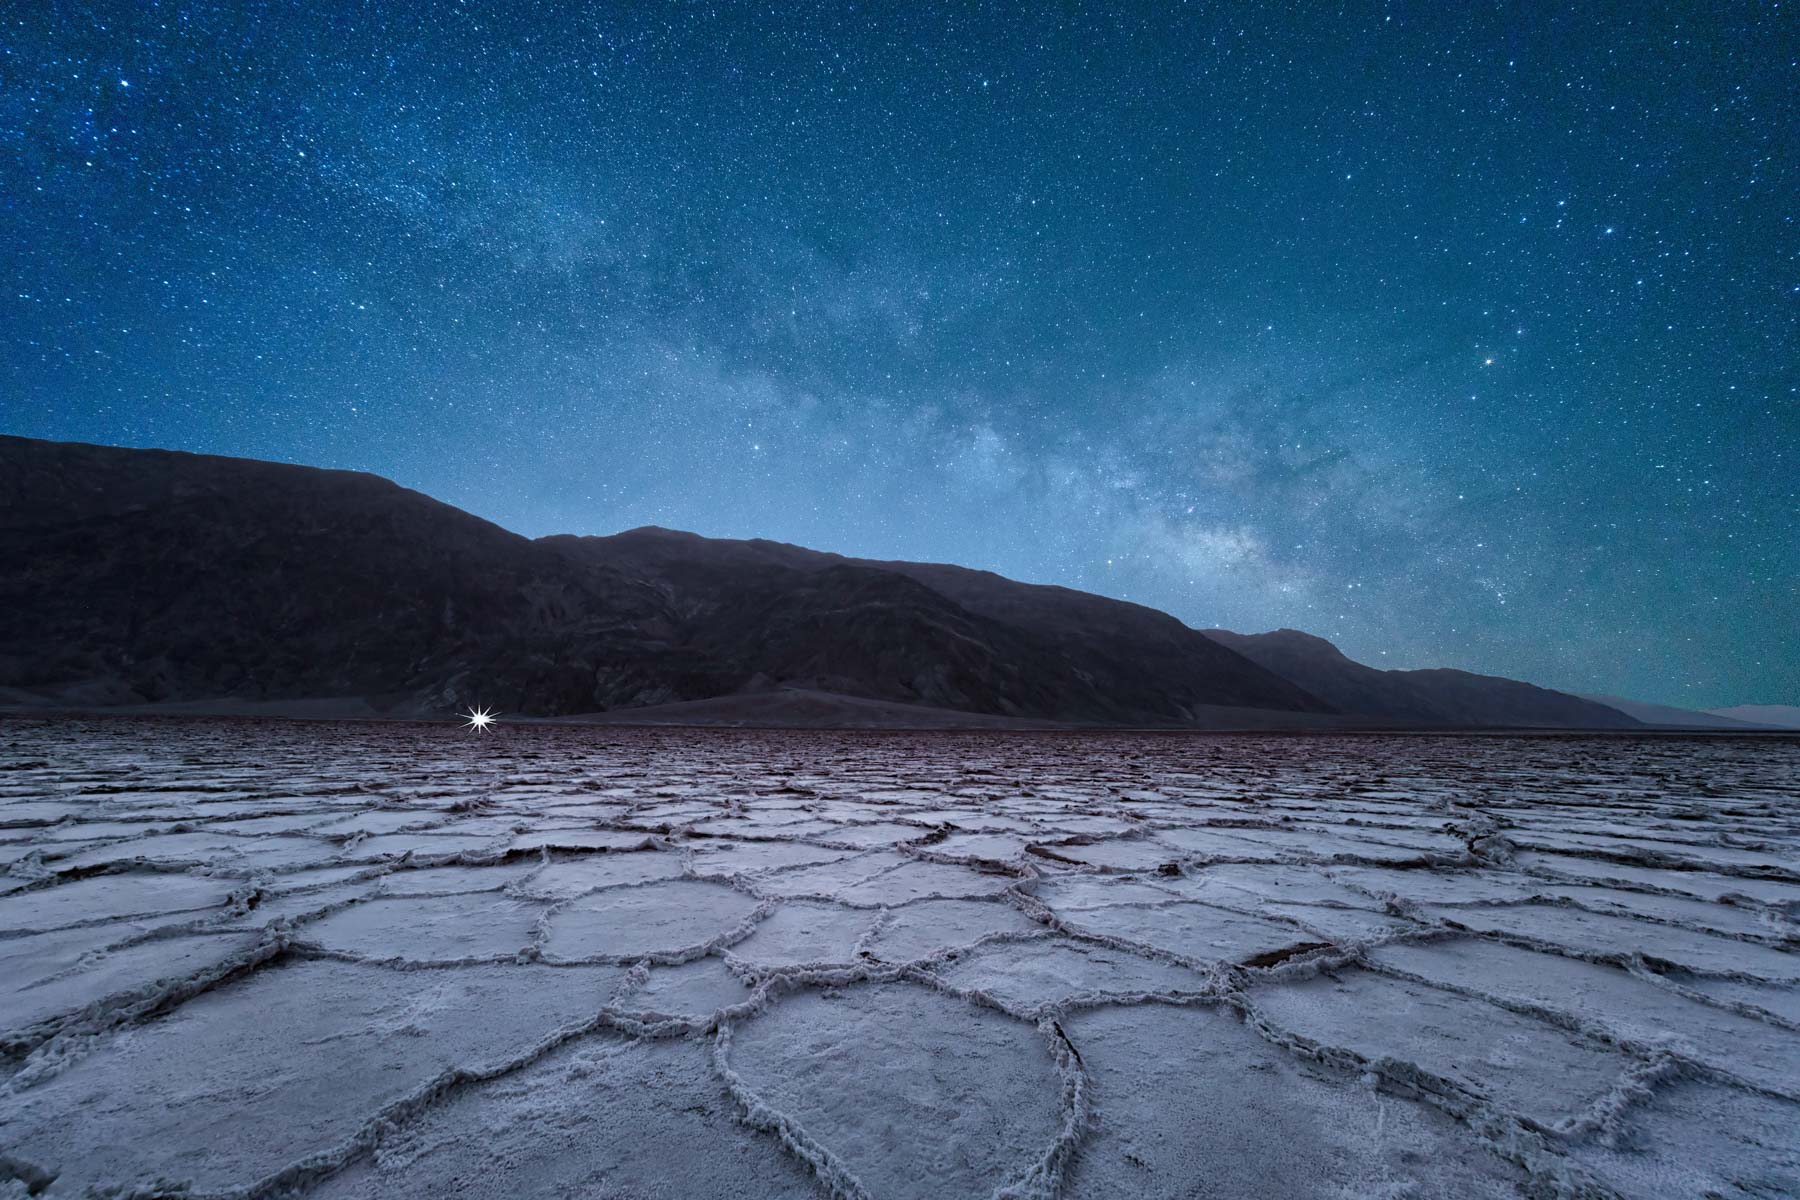 Badwater salt ridges and the Milky Way in Death Valley National Park